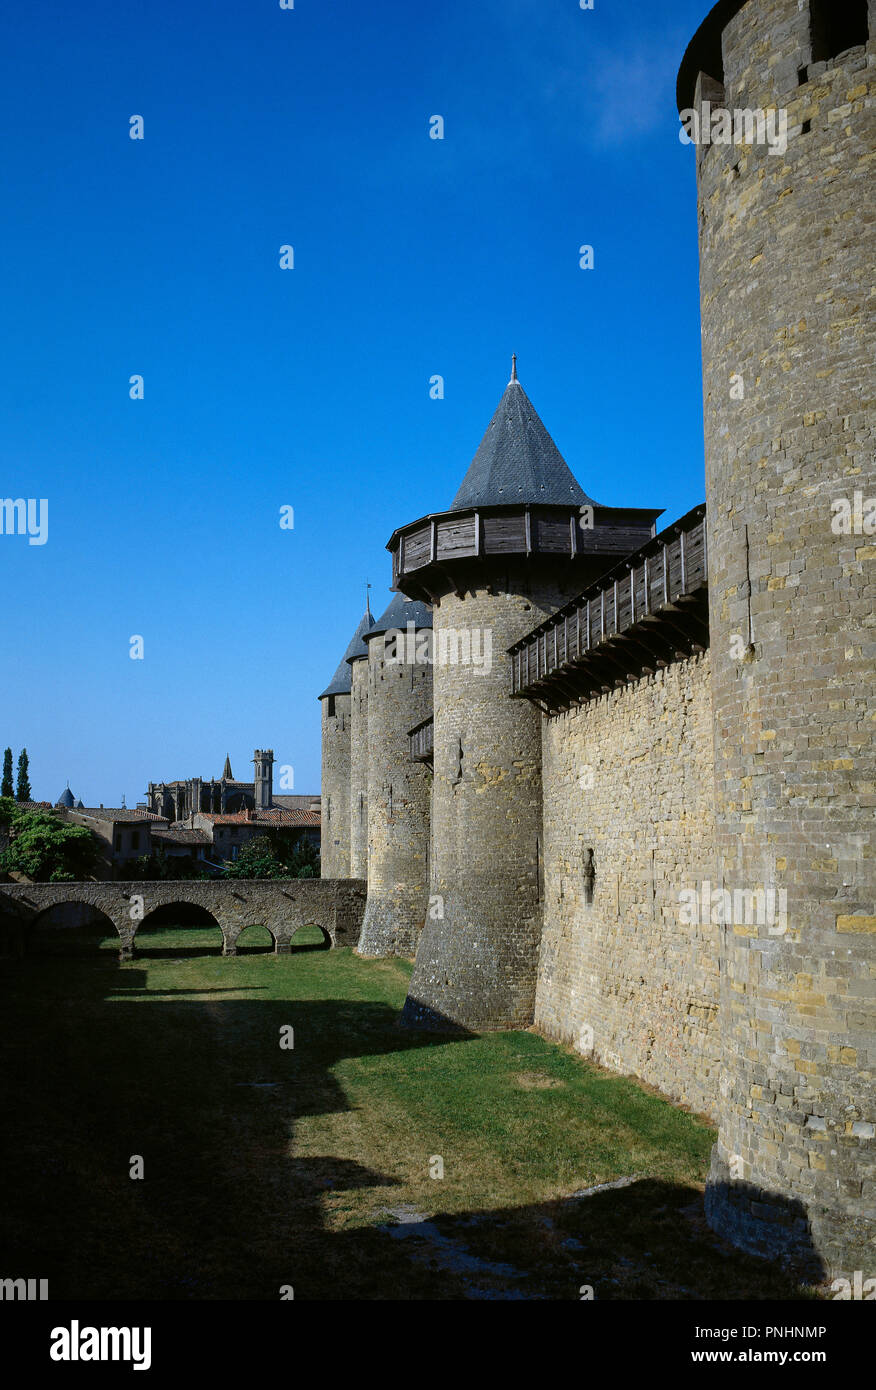 France. Aude department. Occitanie region. Cite de Carcassonne. Medieval citadel. The architect Eugène Viollet-le-Duc renovated the fortress (1853-1879). Defensive towers of the Condal castle, residence of the Trencavell (12 th century). The king Jaime I, in his childhood, was imprisoned in this castle by order of the Lord of Montfort. In the background the Basilica of Saints Nazarius and Celsus. Stock Photo